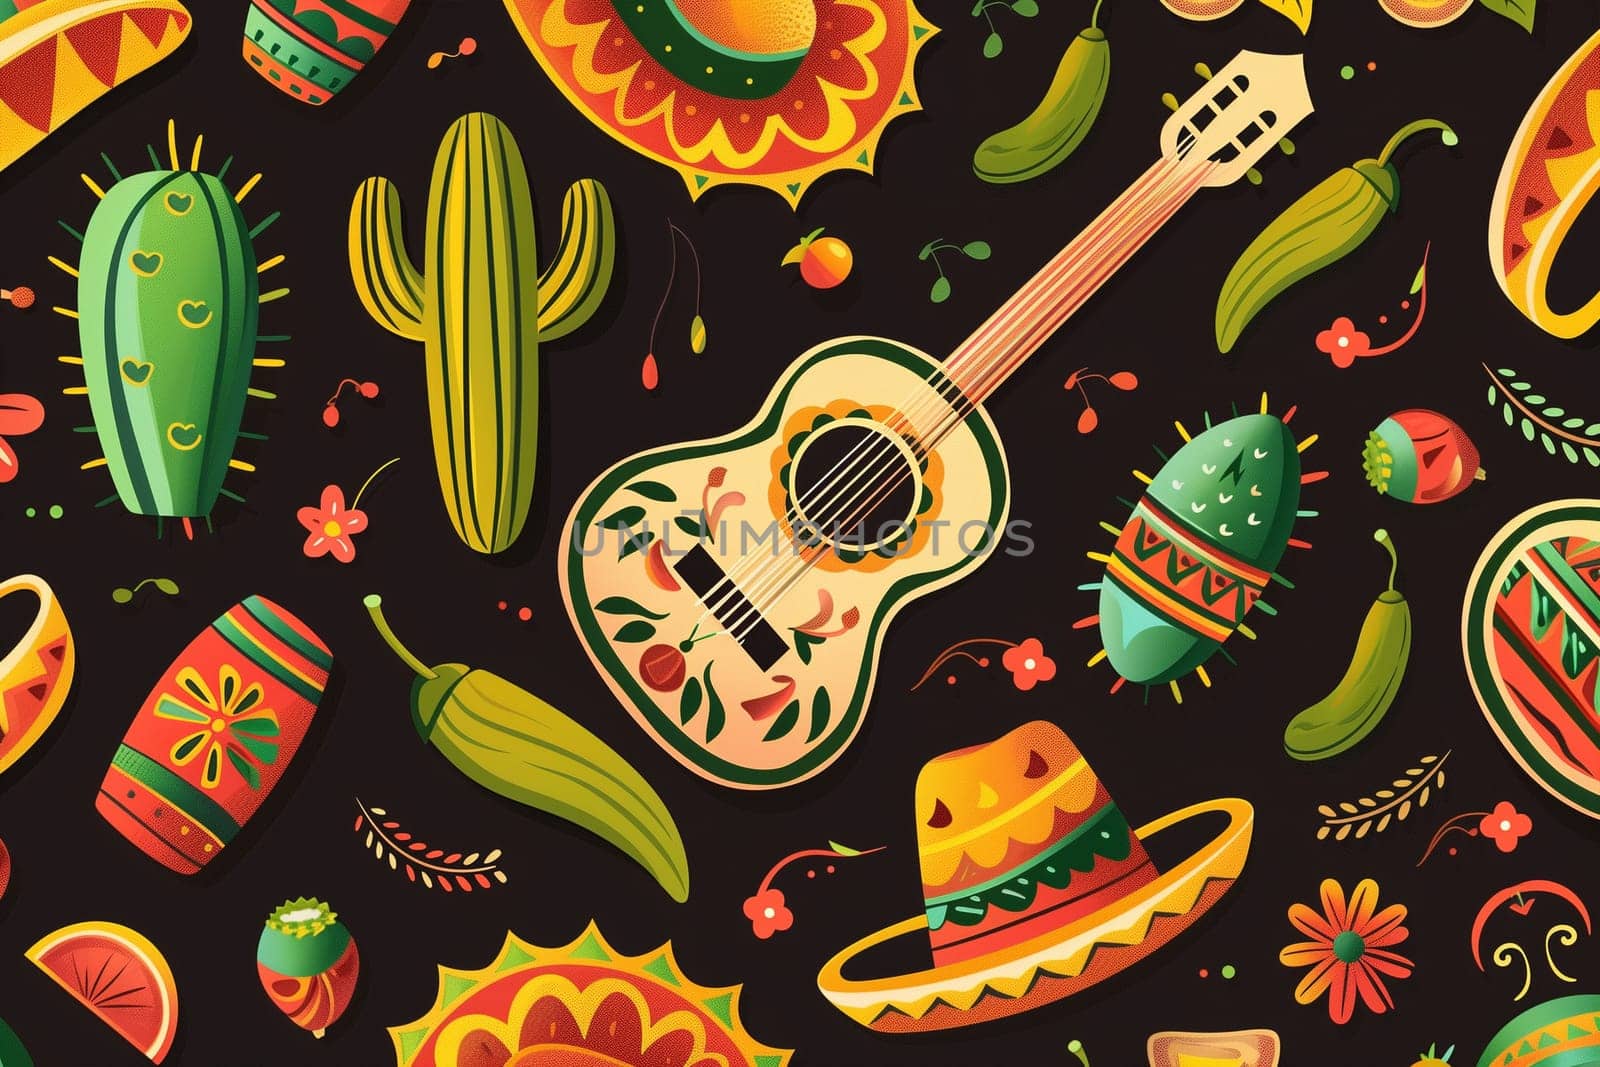 Guitar, Cactus, and Sombrero on Black Background by Sd28DimoN_1976